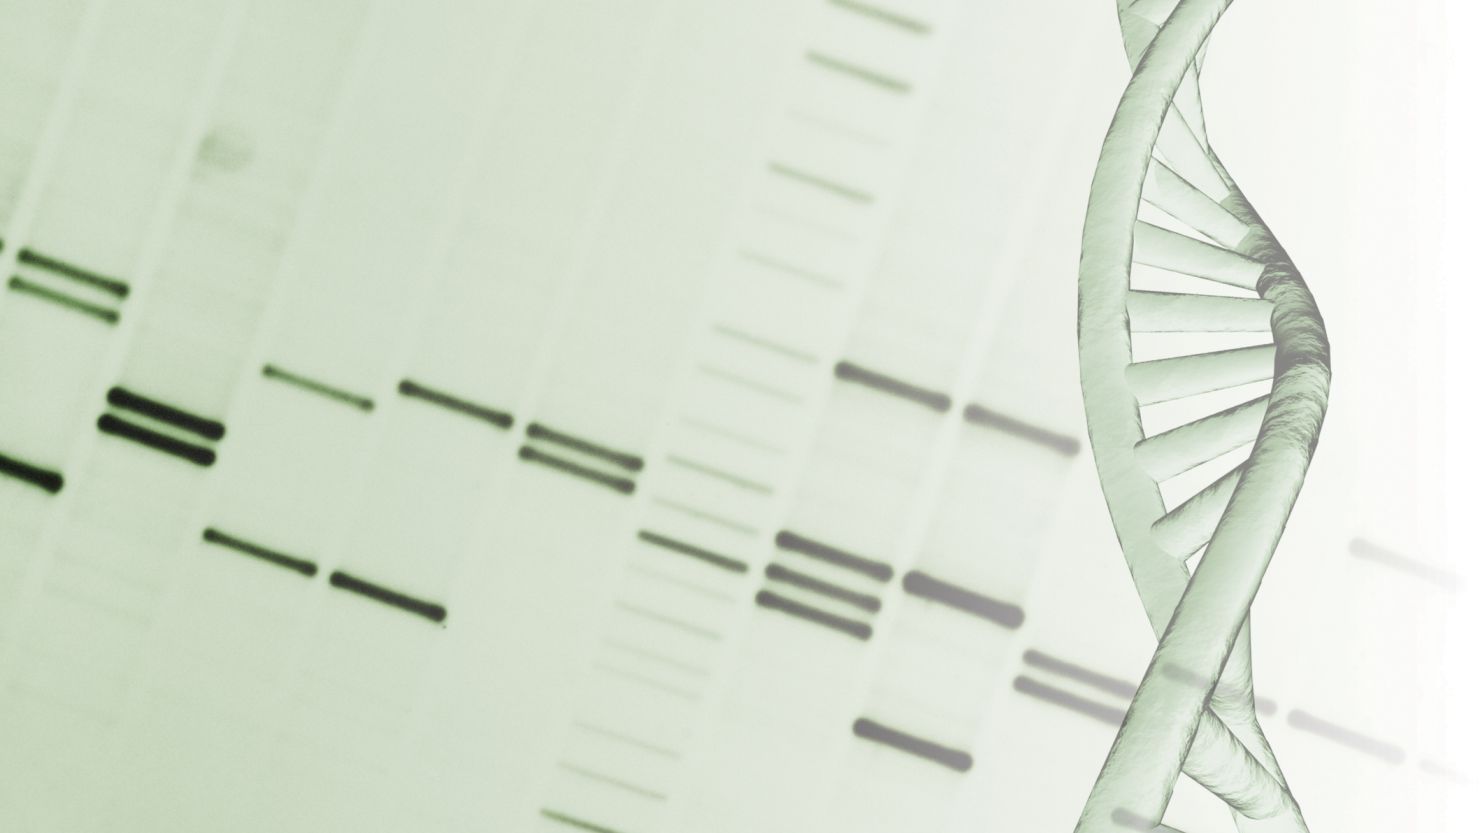 The Supreme Court is mulling whether the government should allow patents for human genes.